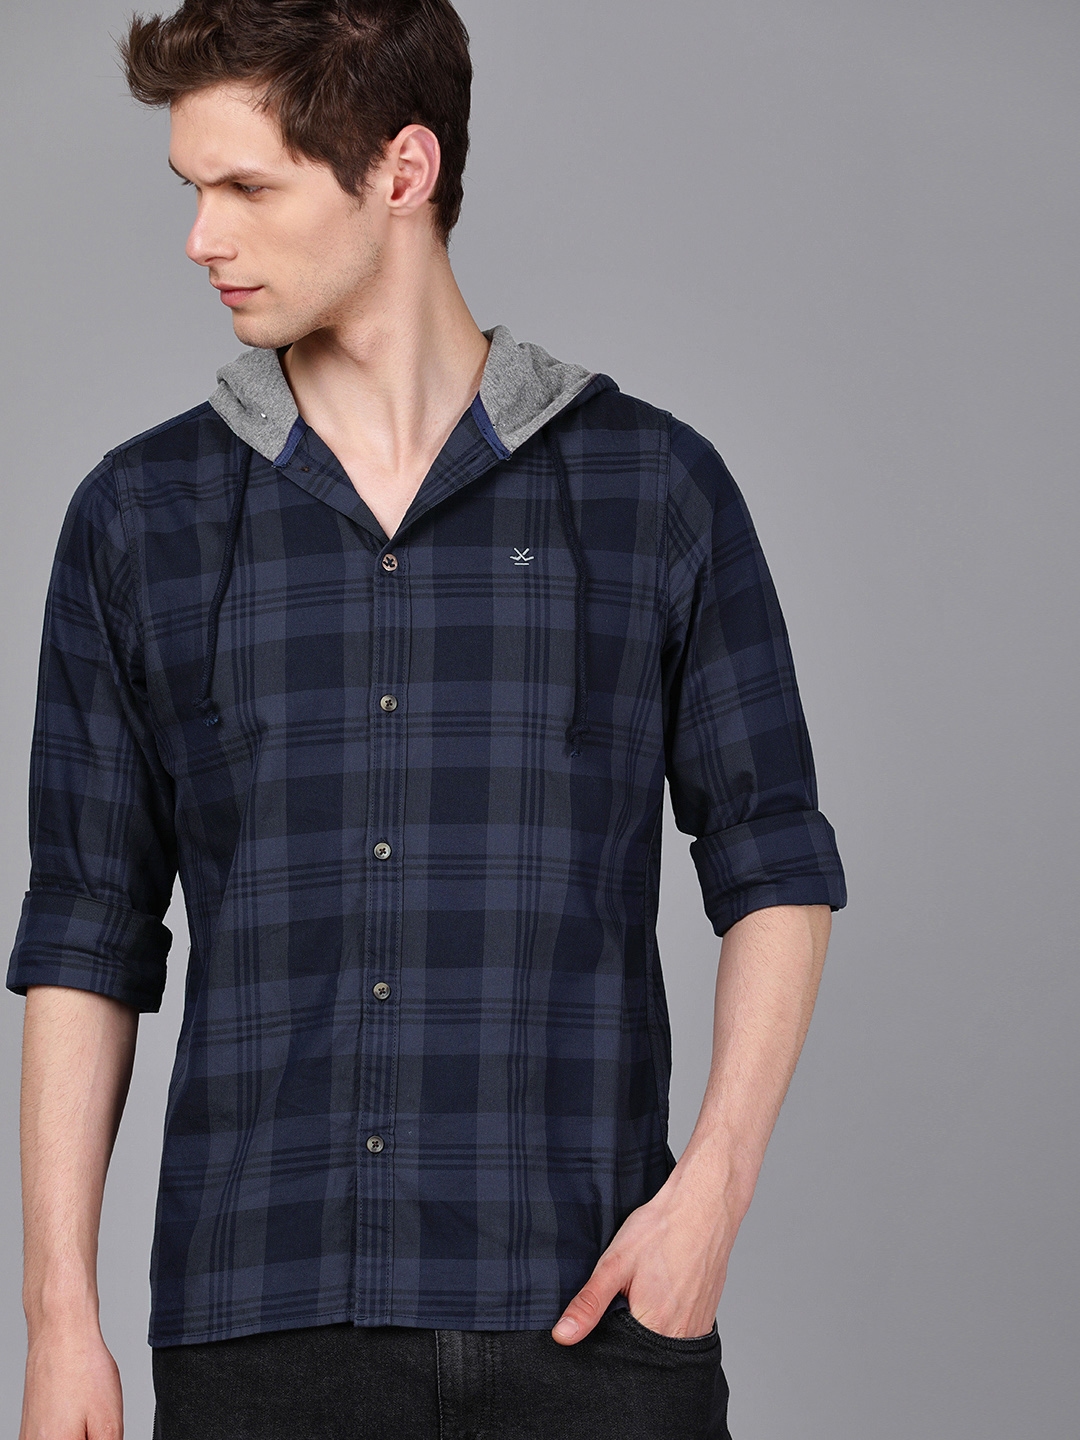 WROGN Men Navy Blue Checked Casual Hooded Shirt (39) by Myntra